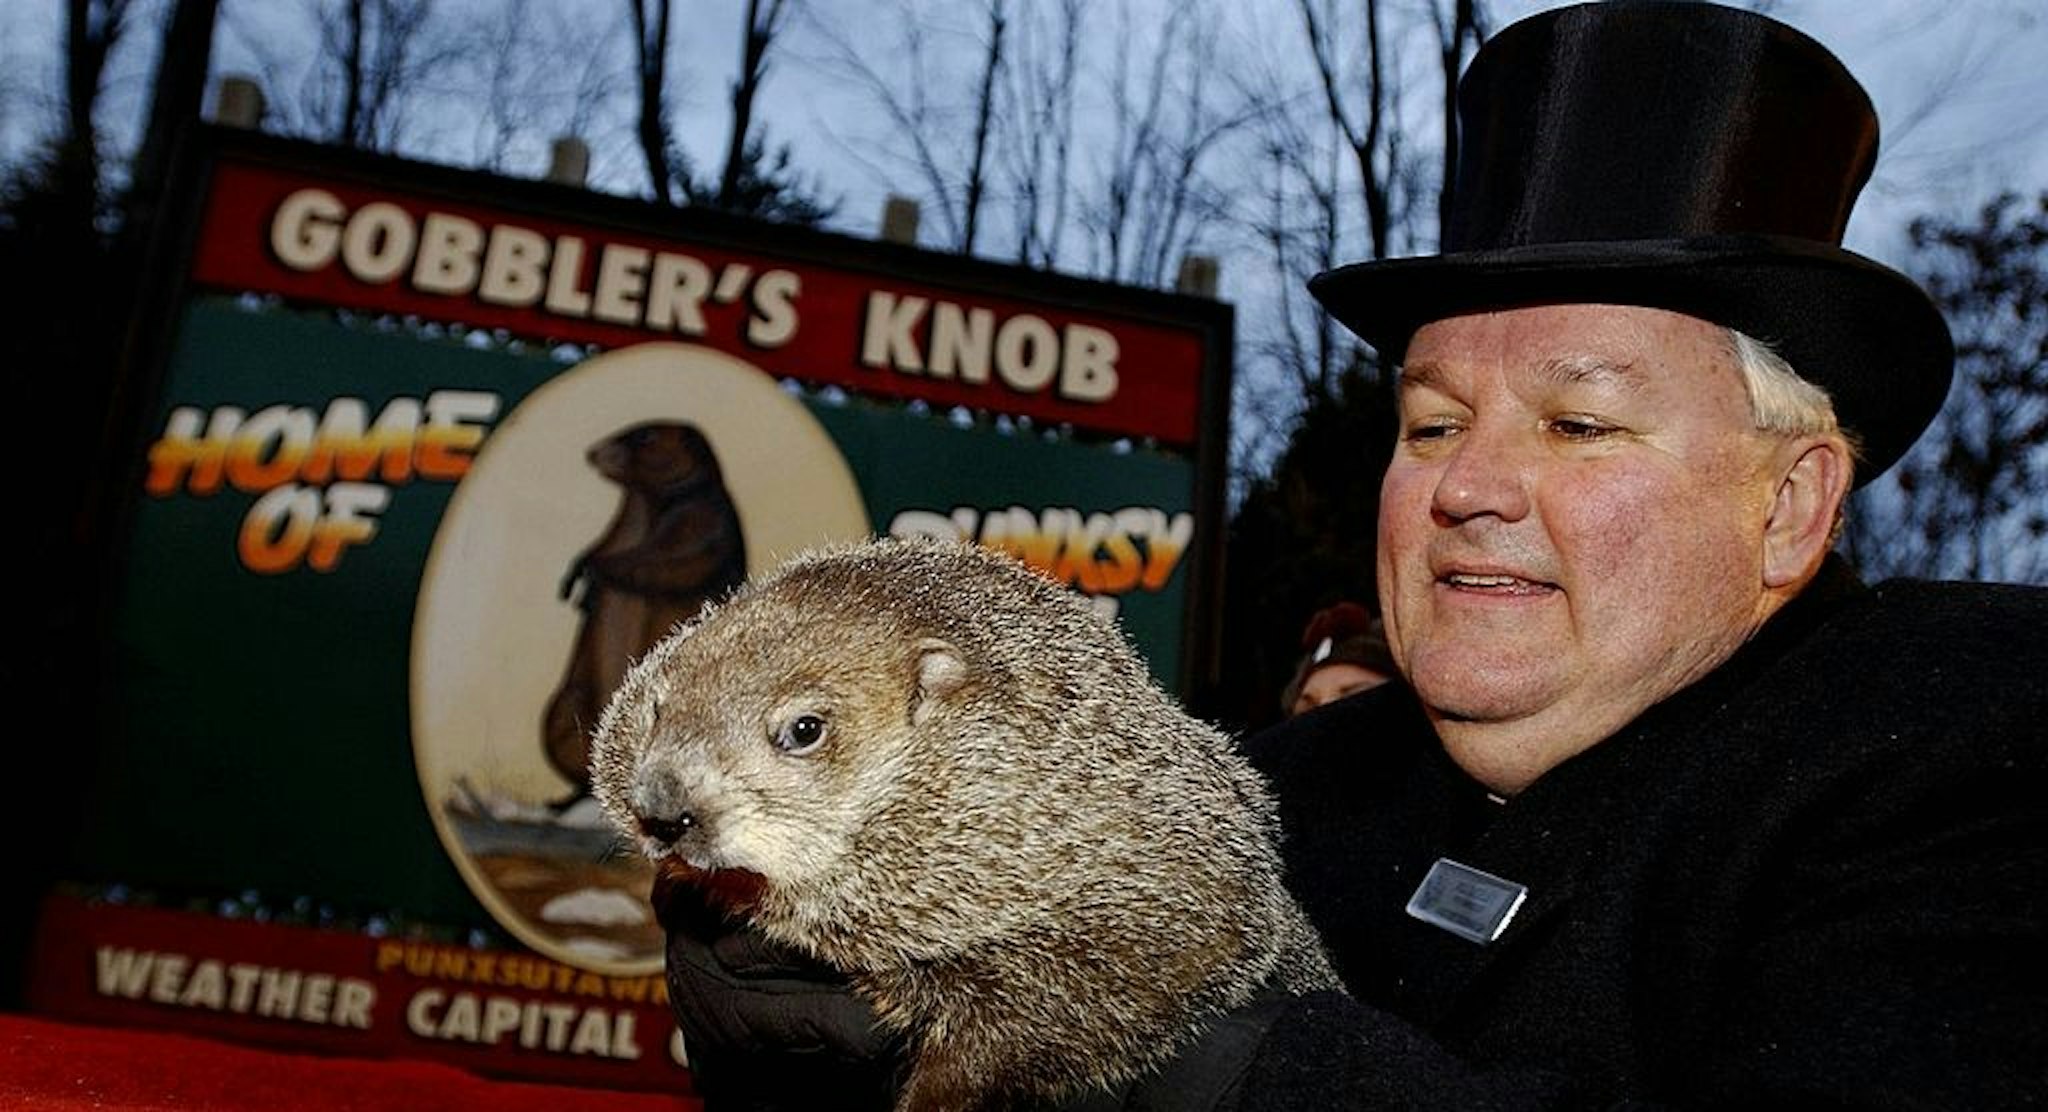 PUNXSUTAWNEY, PA - FEBRUARY 2: Official groundhog handler Bill Deeley holds Punxsutawney Phil on February 2, 2006 in Punxsutawney, Pennsylvania. Every February 2, people gather at Gobbler's Knob, a wooded knoll just outside of Punxsutawney to watch Punxsutawney Phil look for his shadow. If he sees his shadow, it means six more weeks of winter. If he does not see his shadow, it means spring is just around the corner. The legend of Groundhog Day is based on an old Scottish couplet: "If Candlemas Day is bright and clear, there'll be two winters in the year." (Photo by J